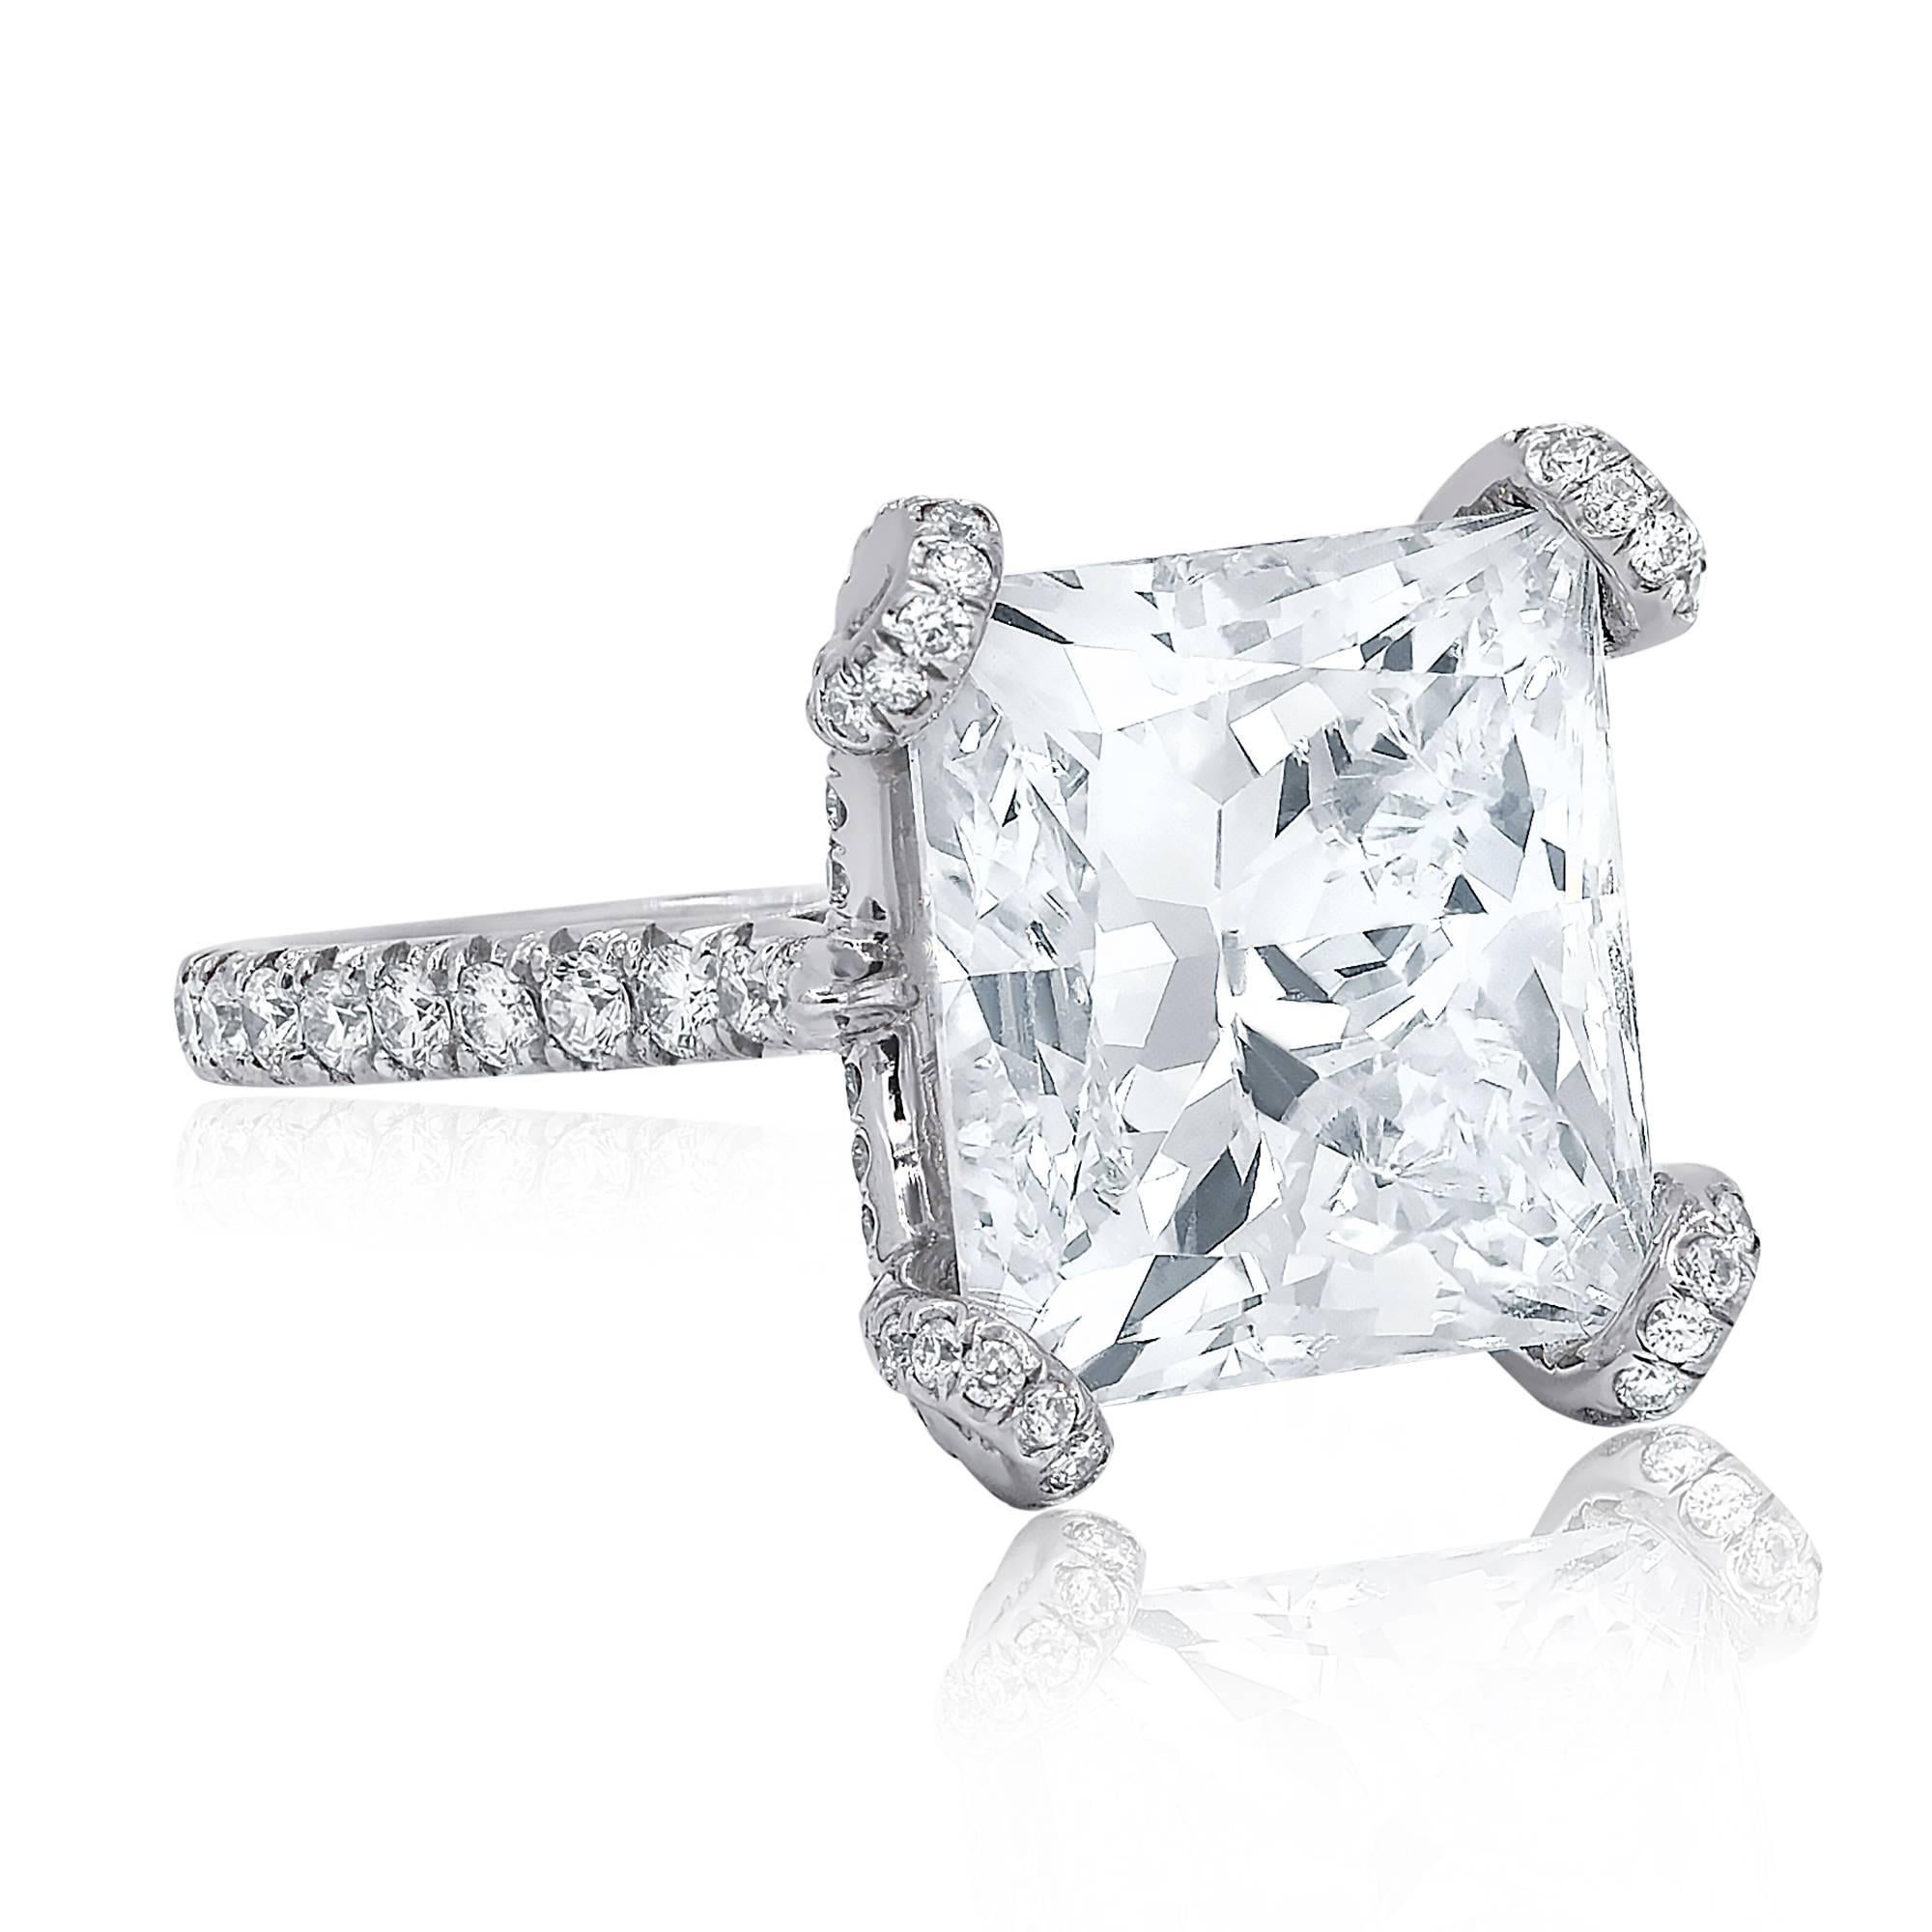 Certified Platinum diamond engagement ring with rectangular modified brilliant cut diamond in the center, weighing 10.02 carat J color/SI1 clarity and accented by 1.00 cts micro pave round brilliant cut diamonds on the side.